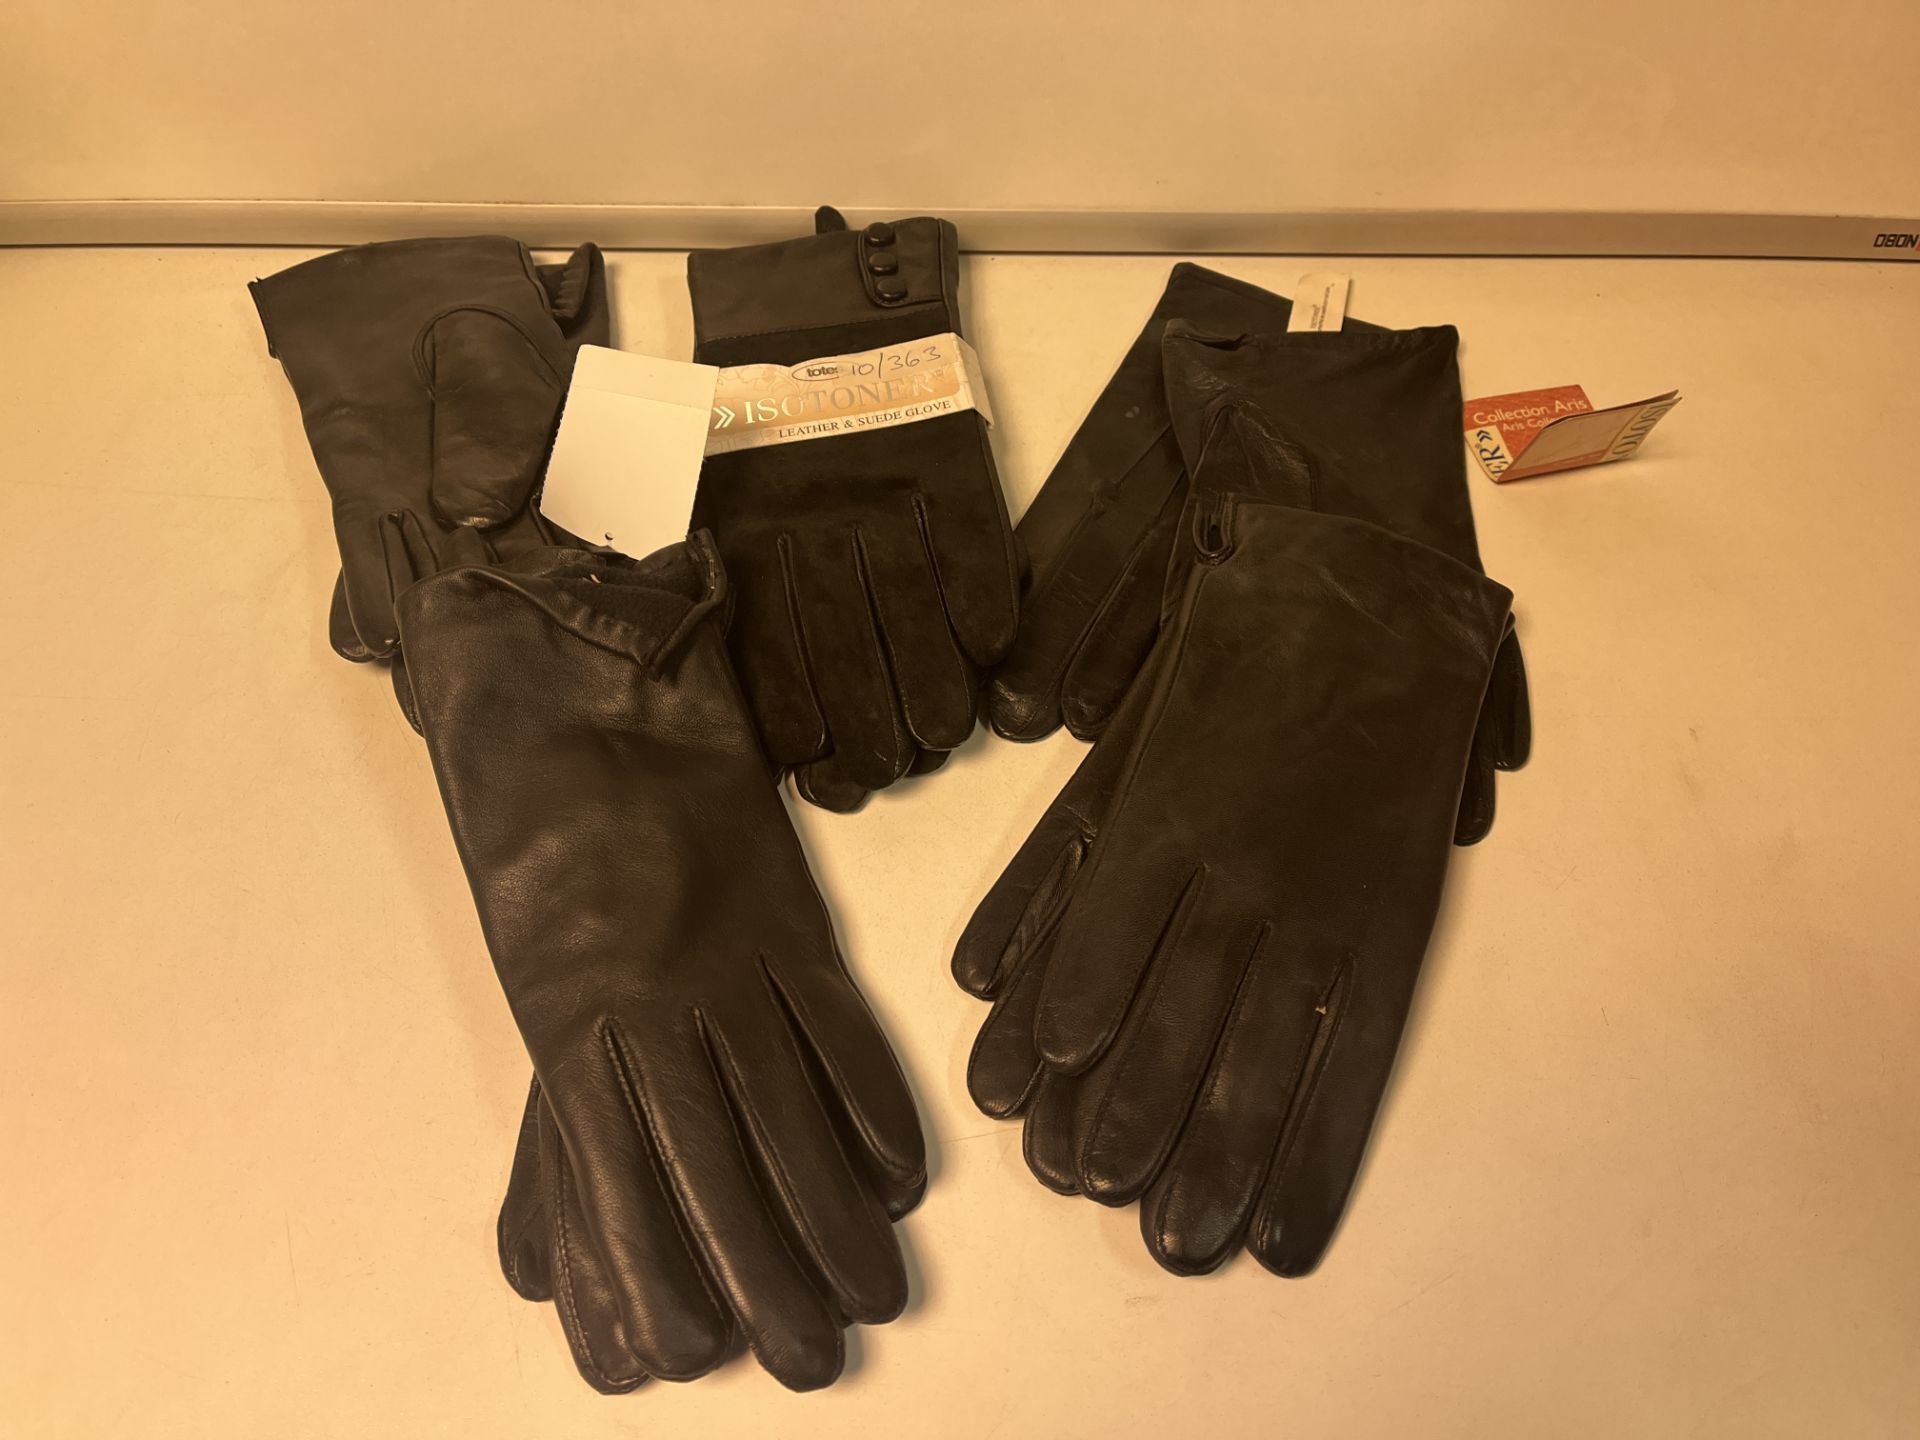 20 X BRAND NEW ASSORTED TOTES LEATHER GLOVES IN VARIOUS STYLES AND SIZES RRP £15-20 EACH R17